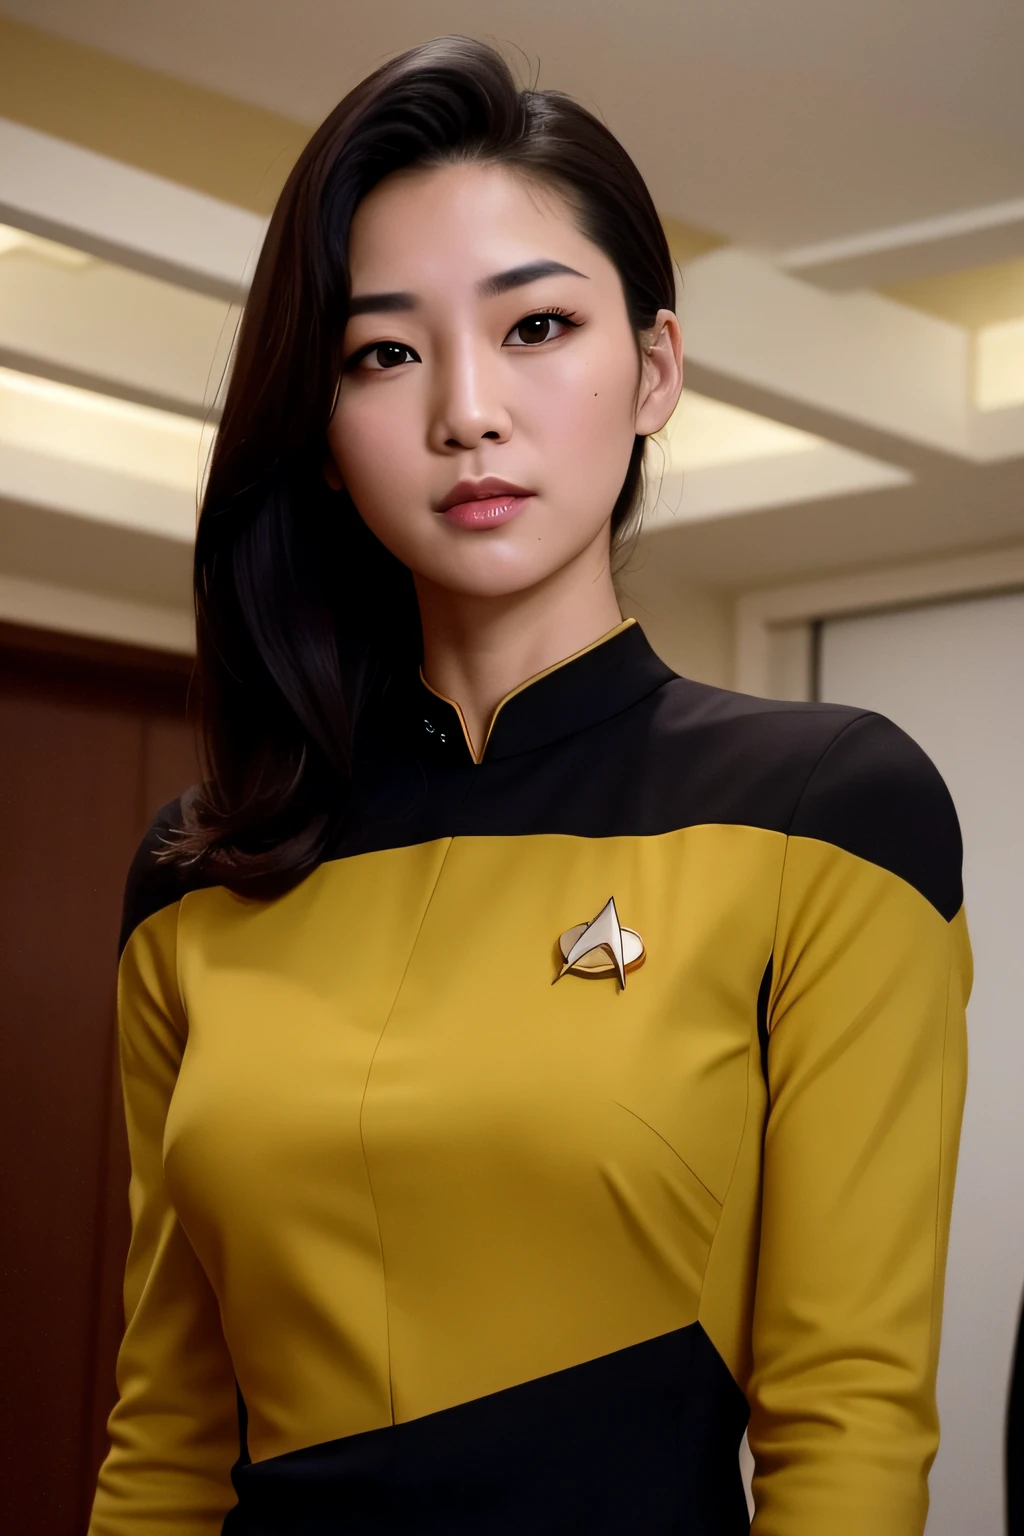 (masterpiece), best quality, expressive eyes, perfect face, Ensign Kim's older sister is a beautiful Asian girl, perfect eyes, perfect hands, yellow & black Star Trek Voyager uniform, tight uniform, photo-realistic, Harry Kim's Sister, ensign Harry Kim's Sister, bright indoor of Starship